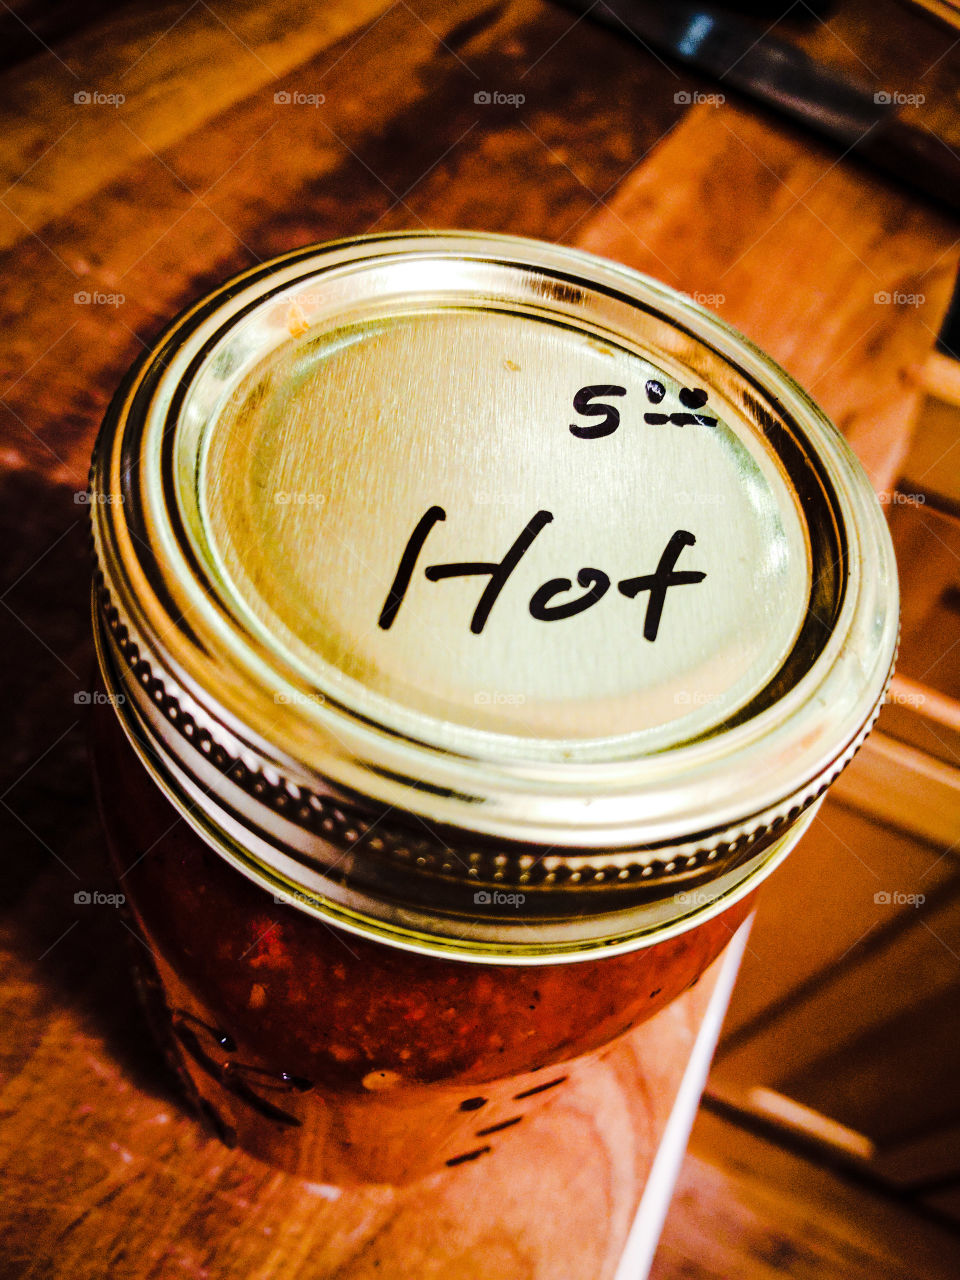 Homemade red chili salsa in a ball jar. Reads "$5 Hot"